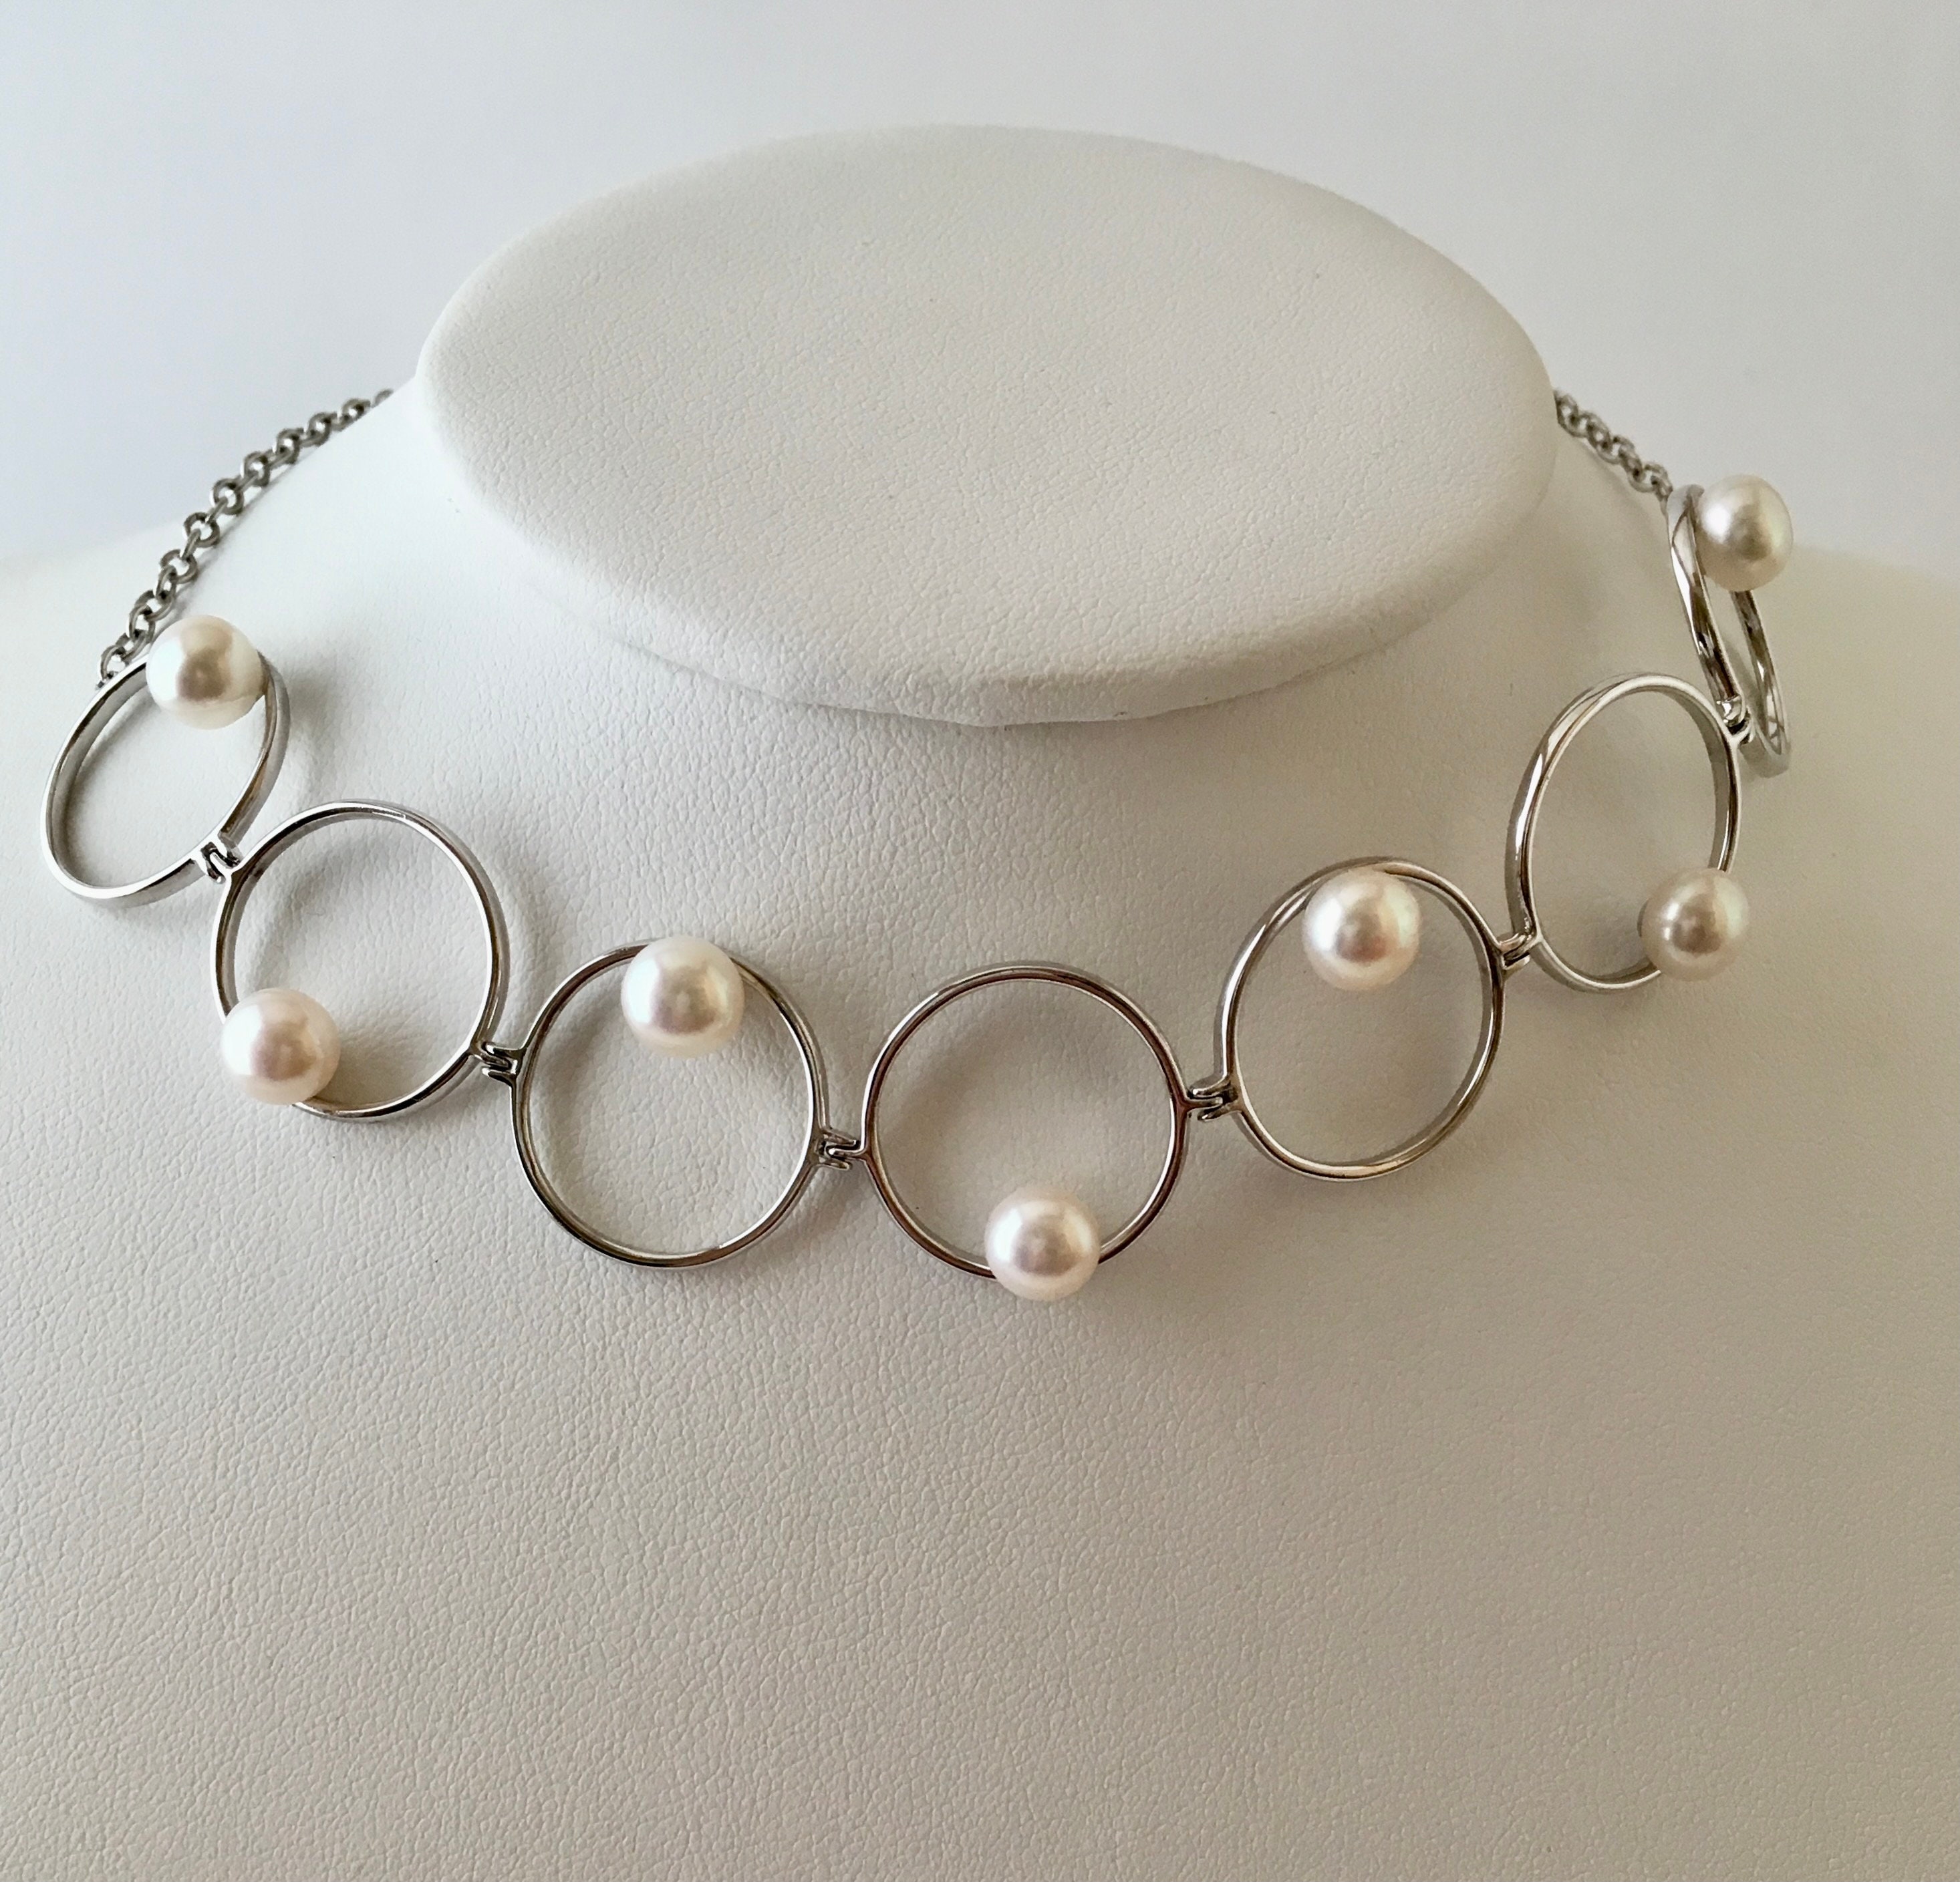 Pearl Choker Necklace Collar Necklace Vintage 1960 Style 